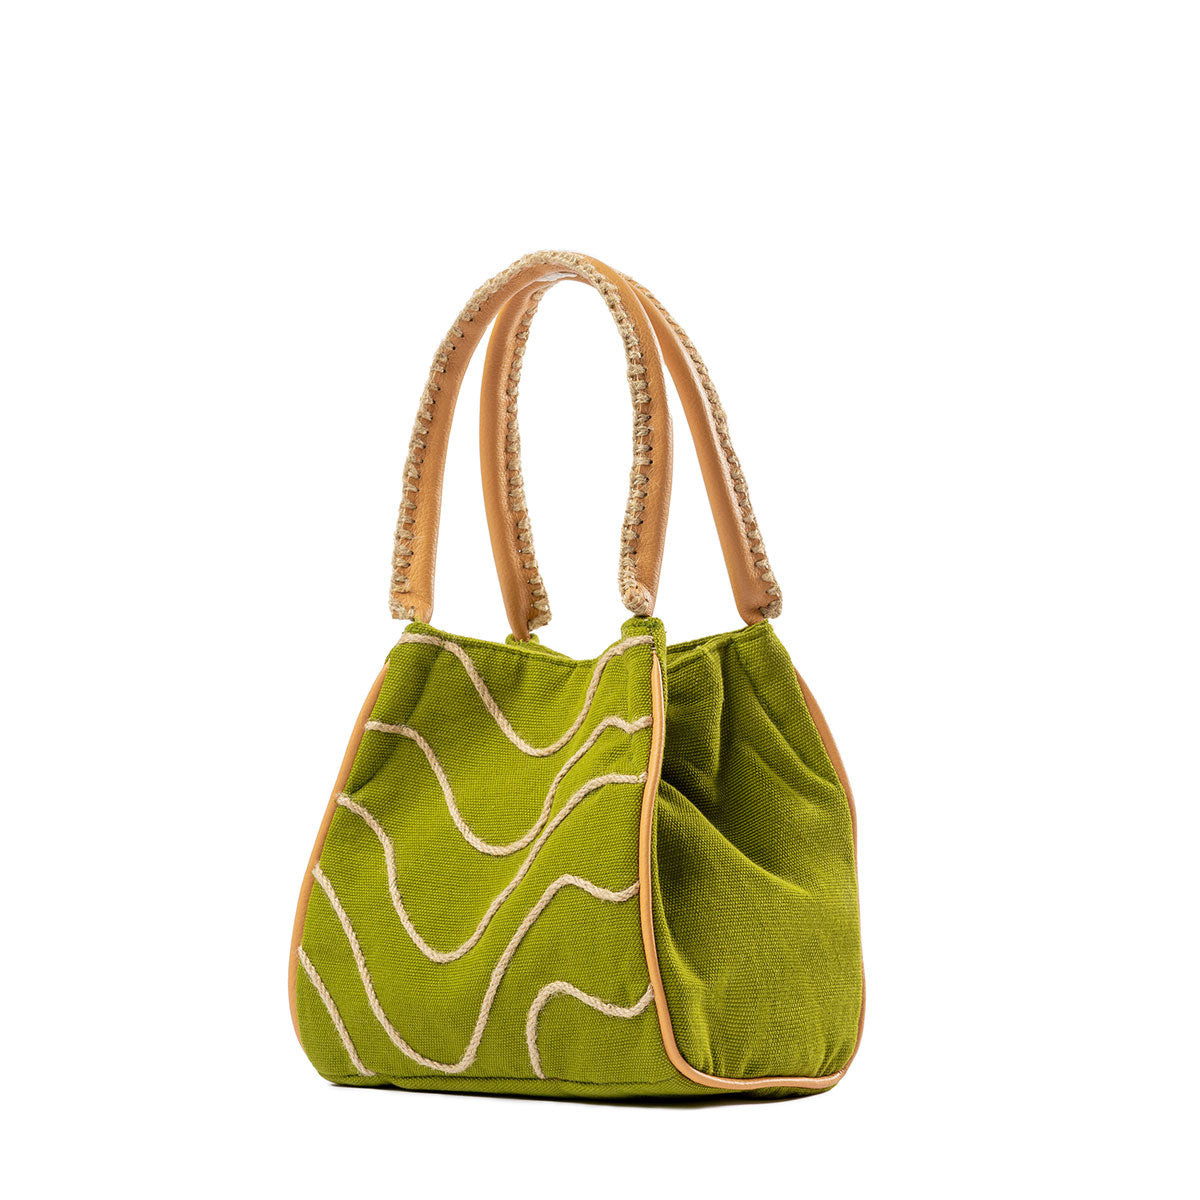 A right-sided angle of the hand woven artisan Flora Petite Crossbody in Turf Moss. The sides have a solid green fabric with a leather vein detailing. It has embroidered detailing on the leather handles. It is shown without the leather crossbody strap.